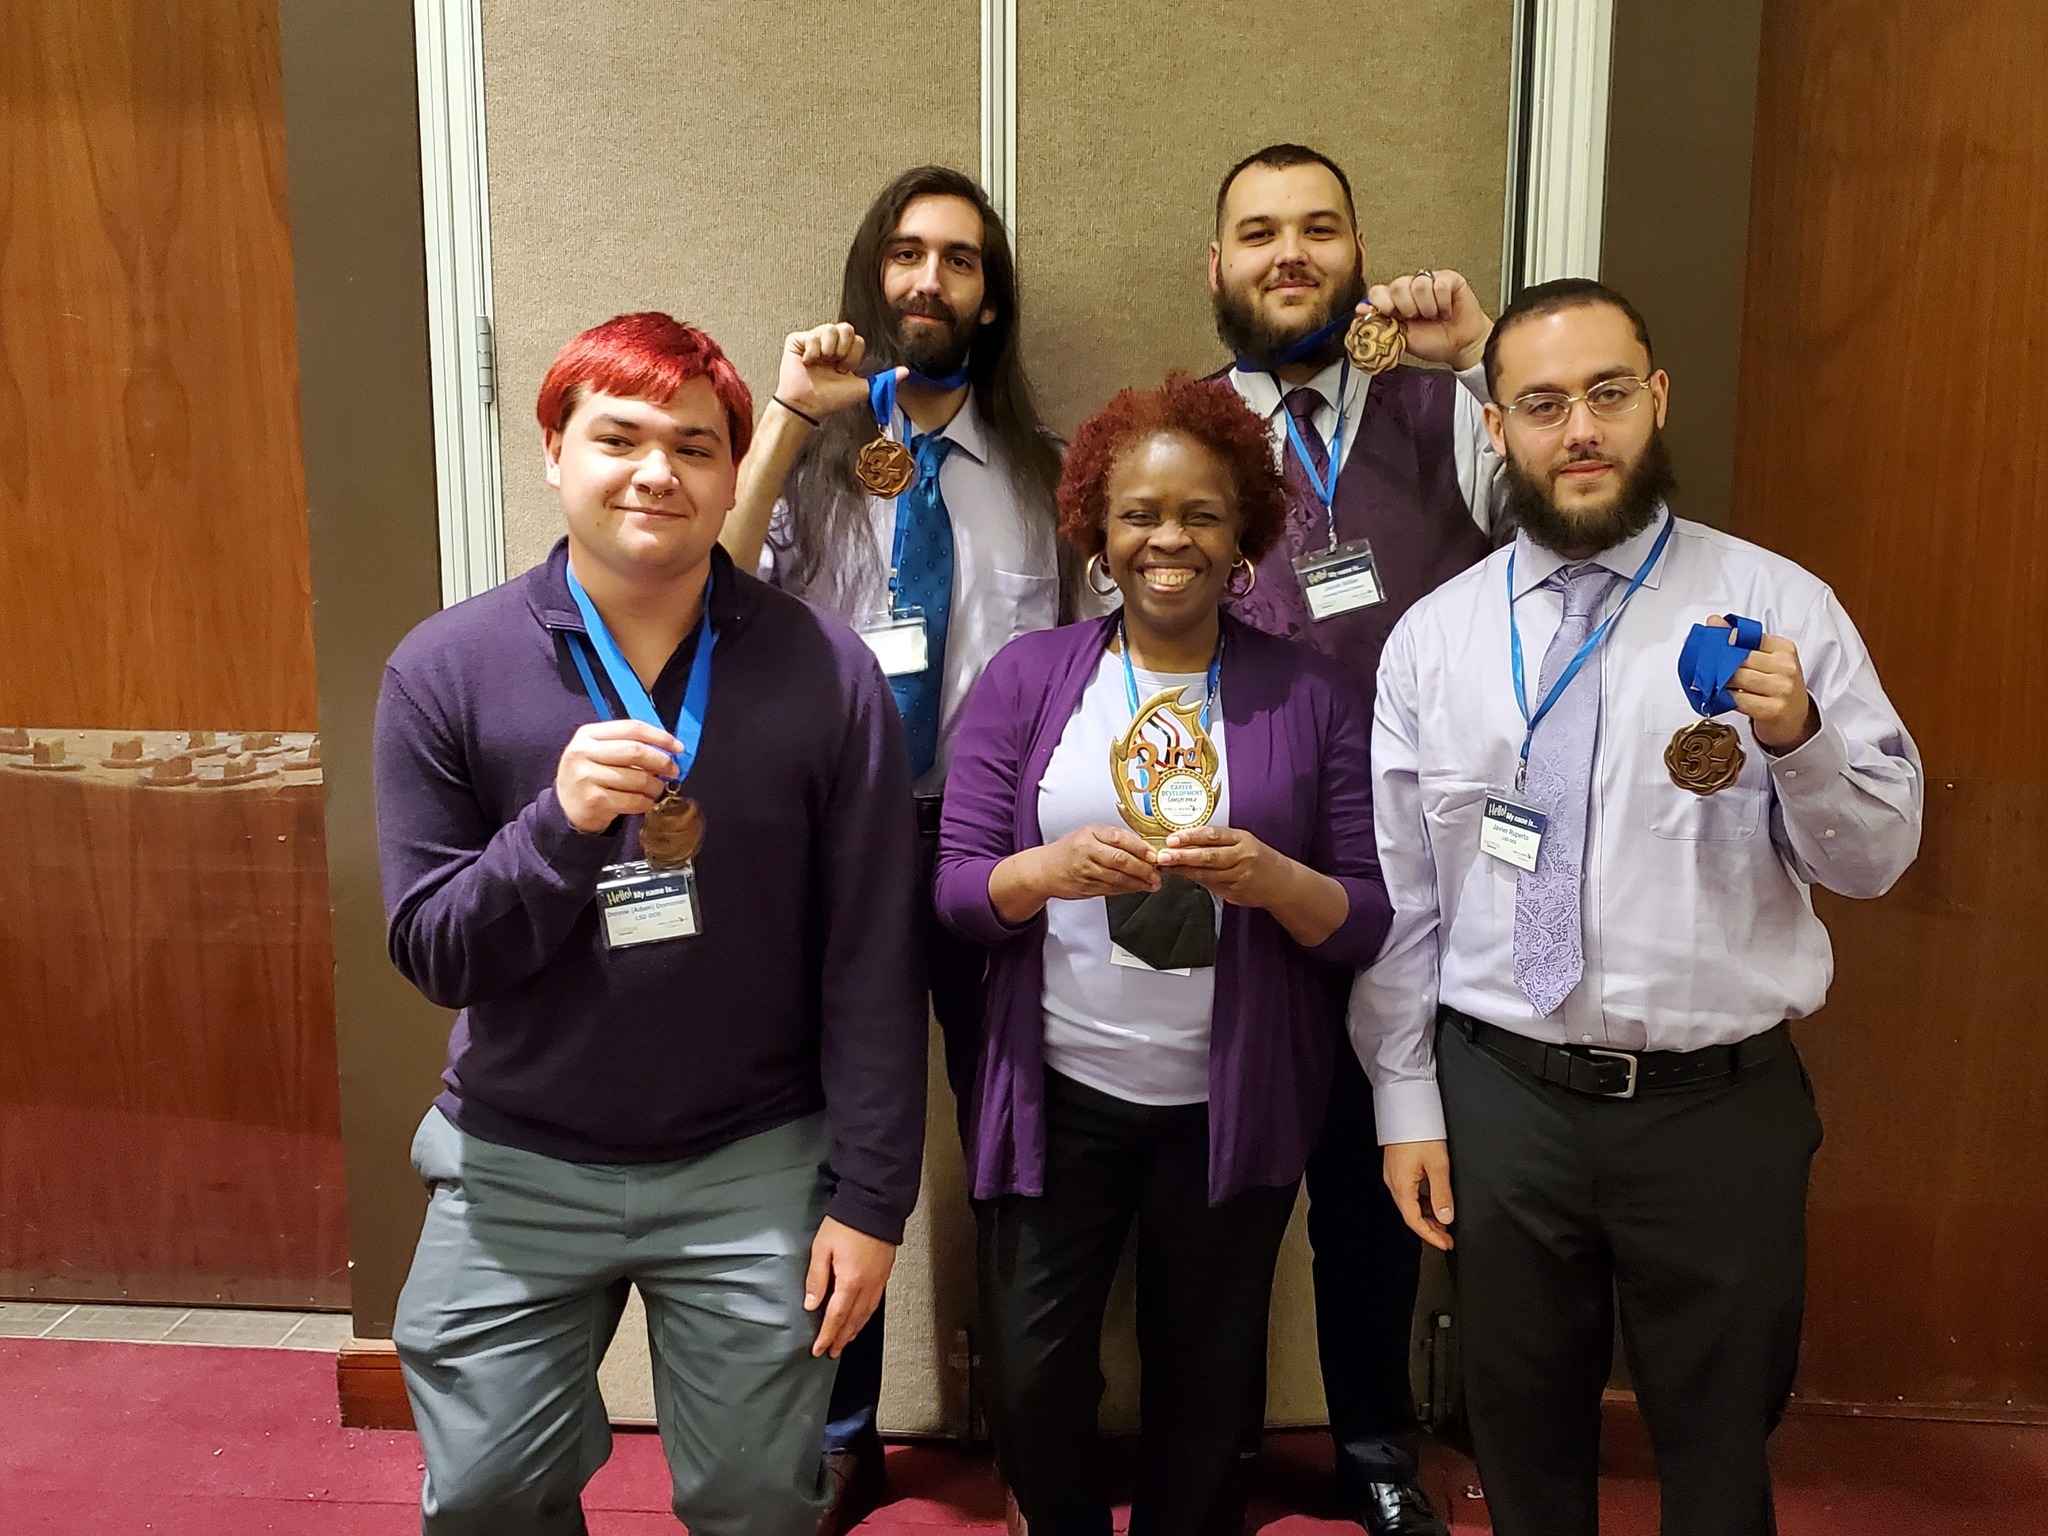 Students and teacher pose with award ribbons, April 29th, 2022 - Jobs for Michigan Graduation